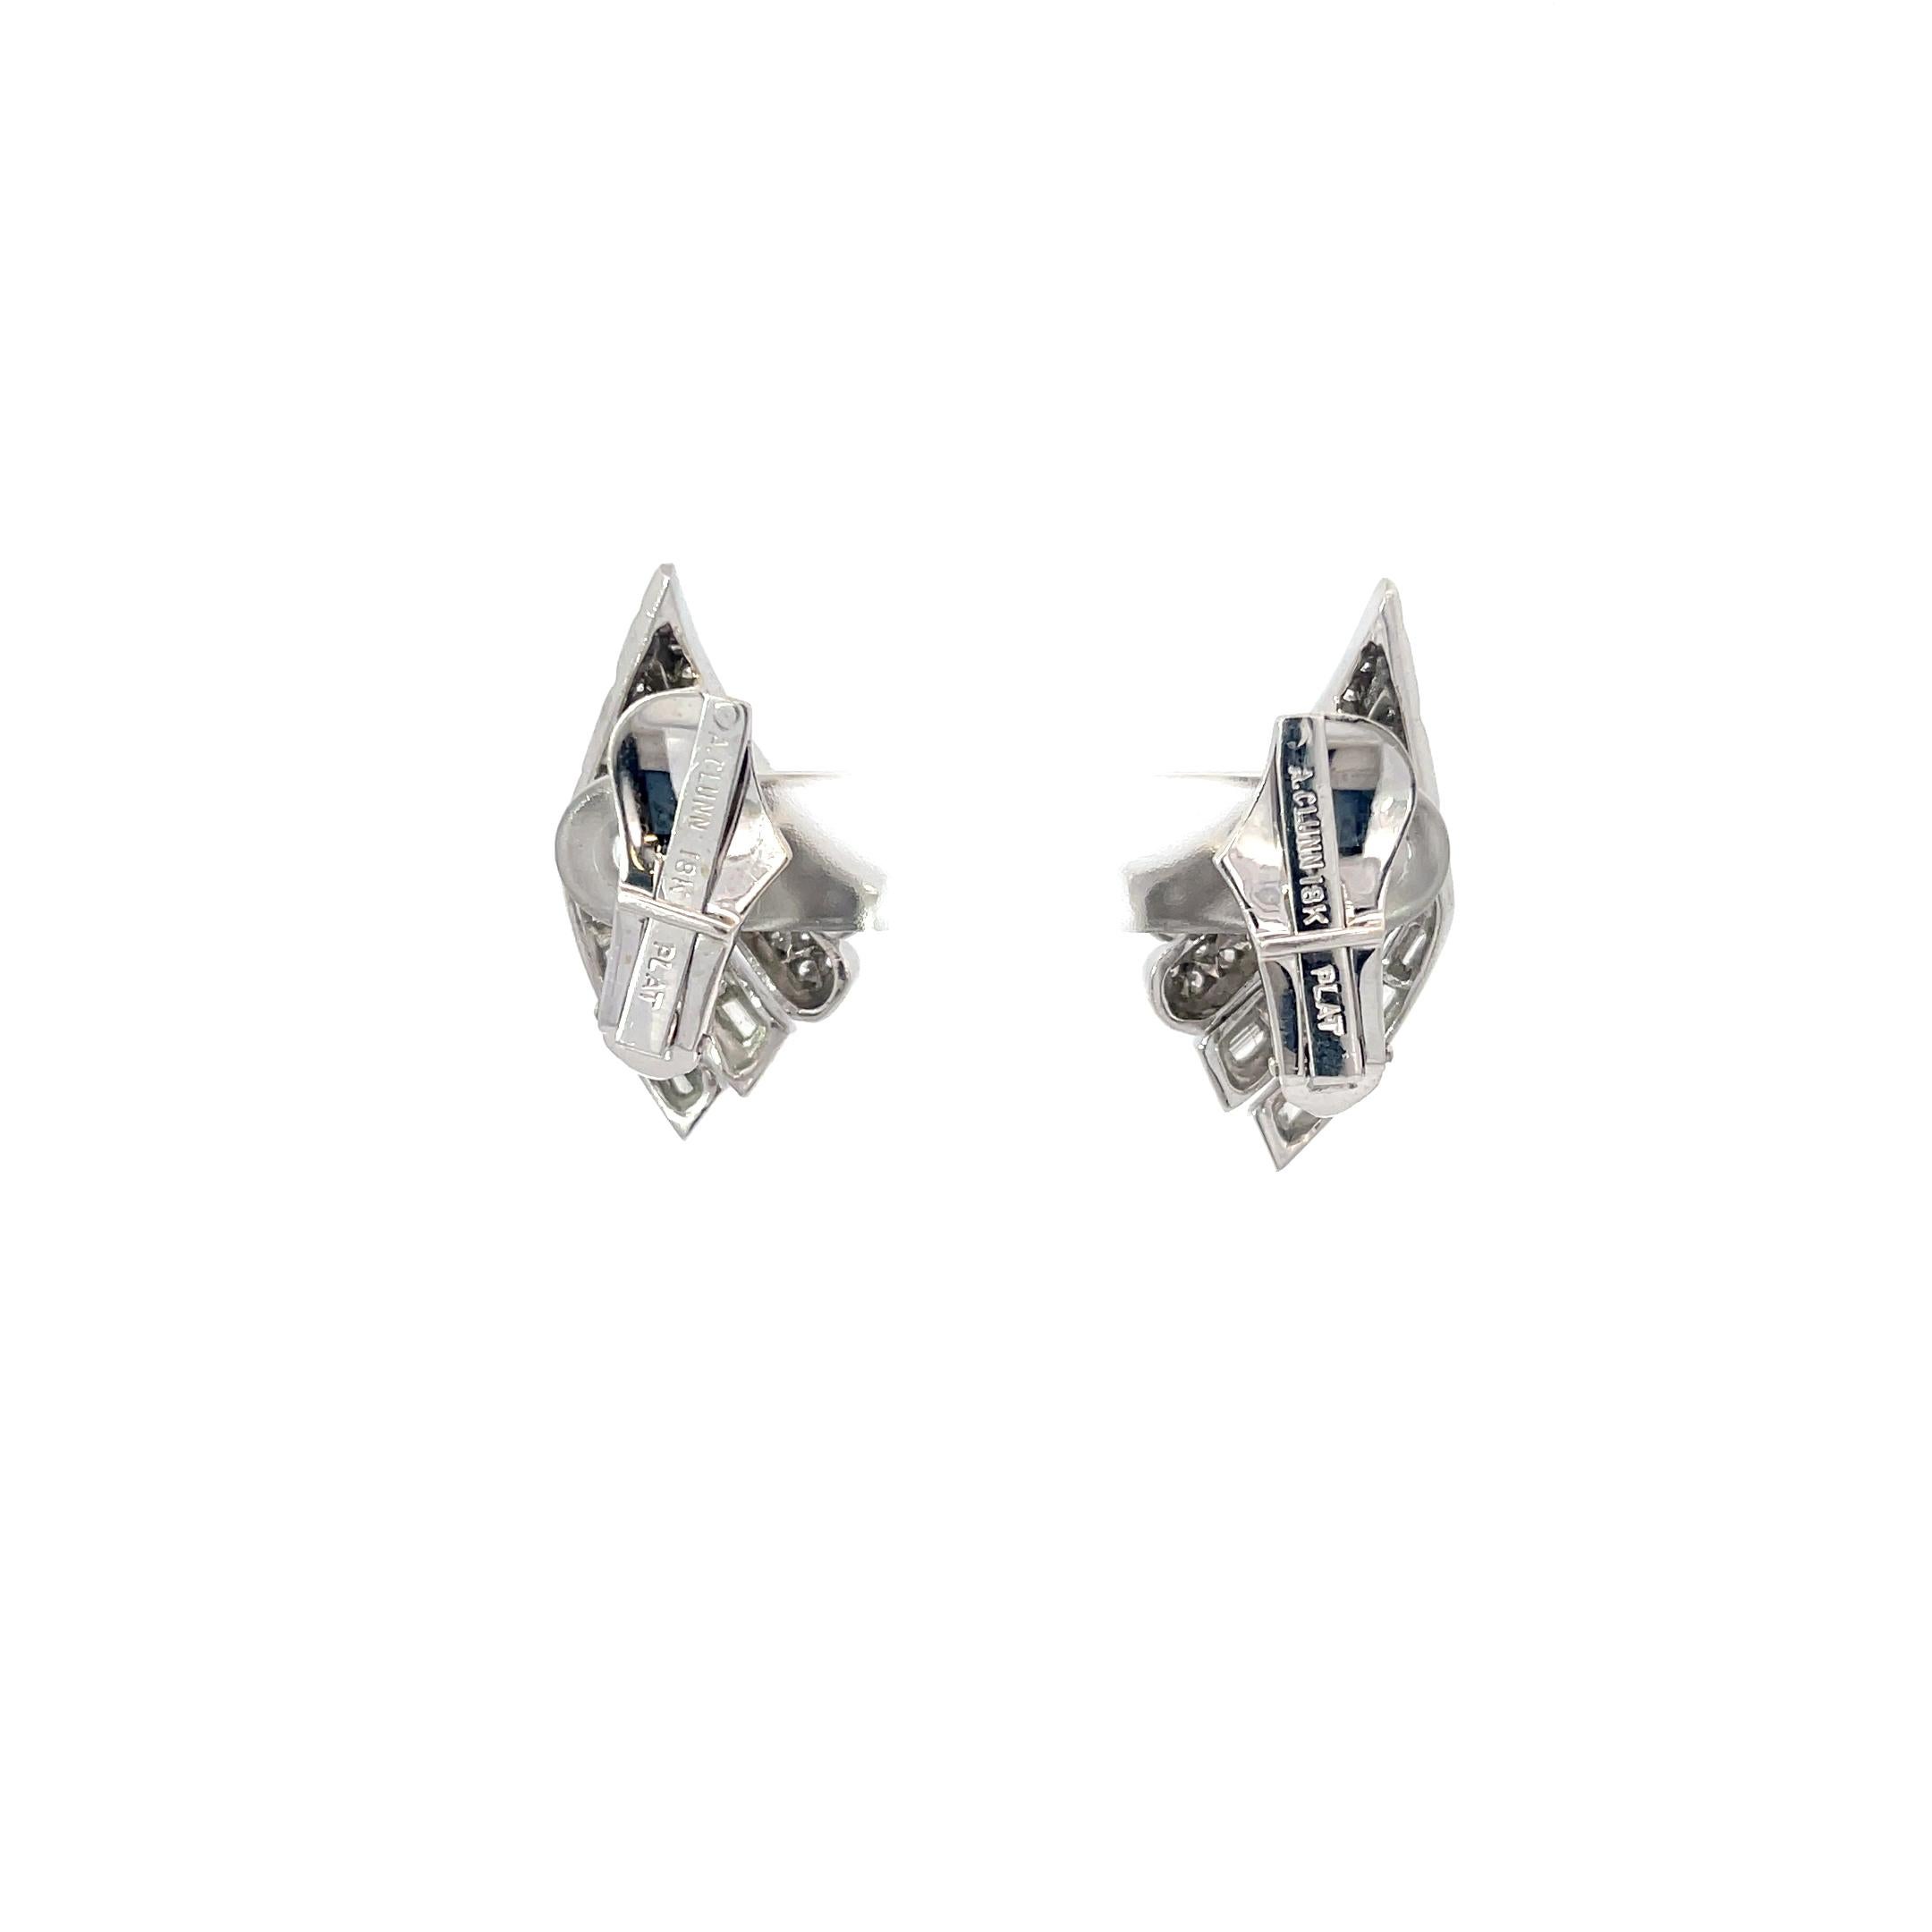 Andrew Clunn 3ctw Diamond Earrings Platinum In Good Condition For Sale In Dallas, TX